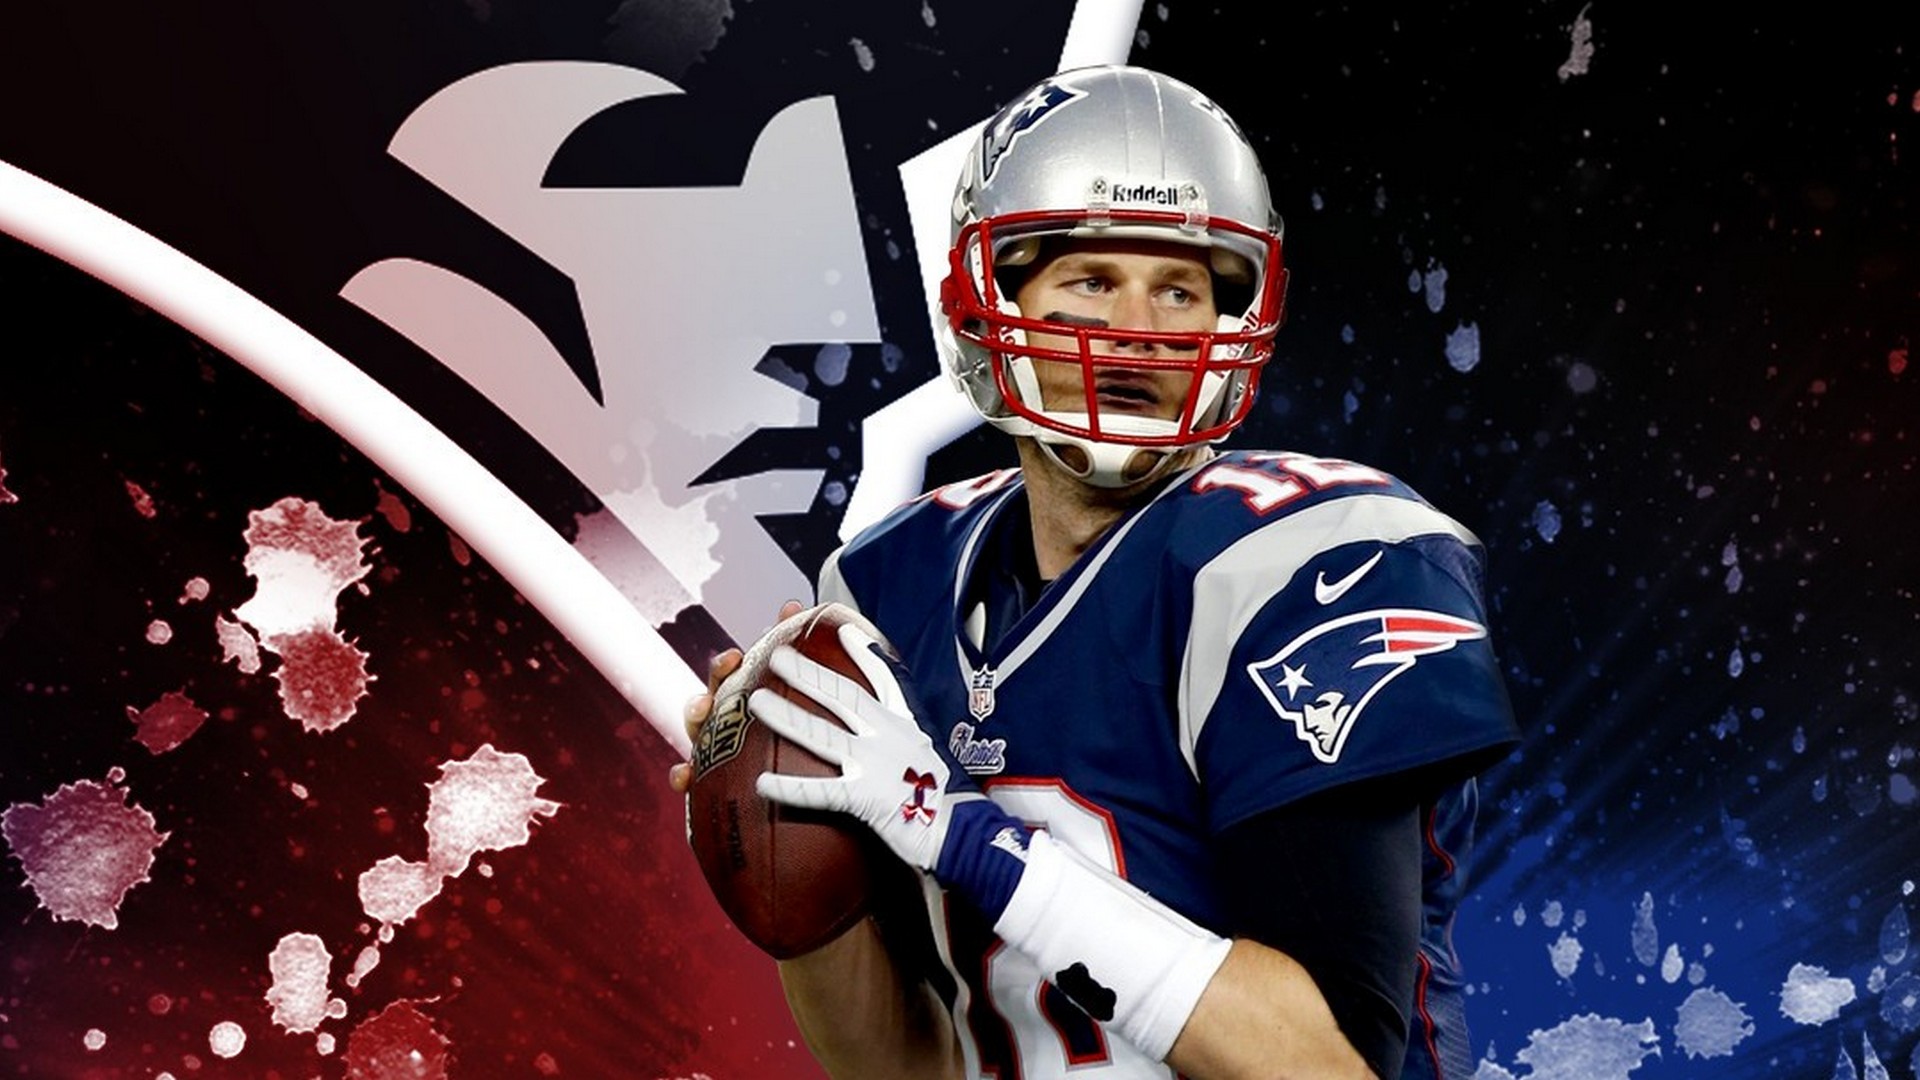 Wallpapers Computer Tom Brady Goat With Resolution 1920X1080 pixel. You can make this wallpaper for your Desktop Computer Backgrounds, Mac Wallpapers, Android Lock screen or iPhone Screensavers